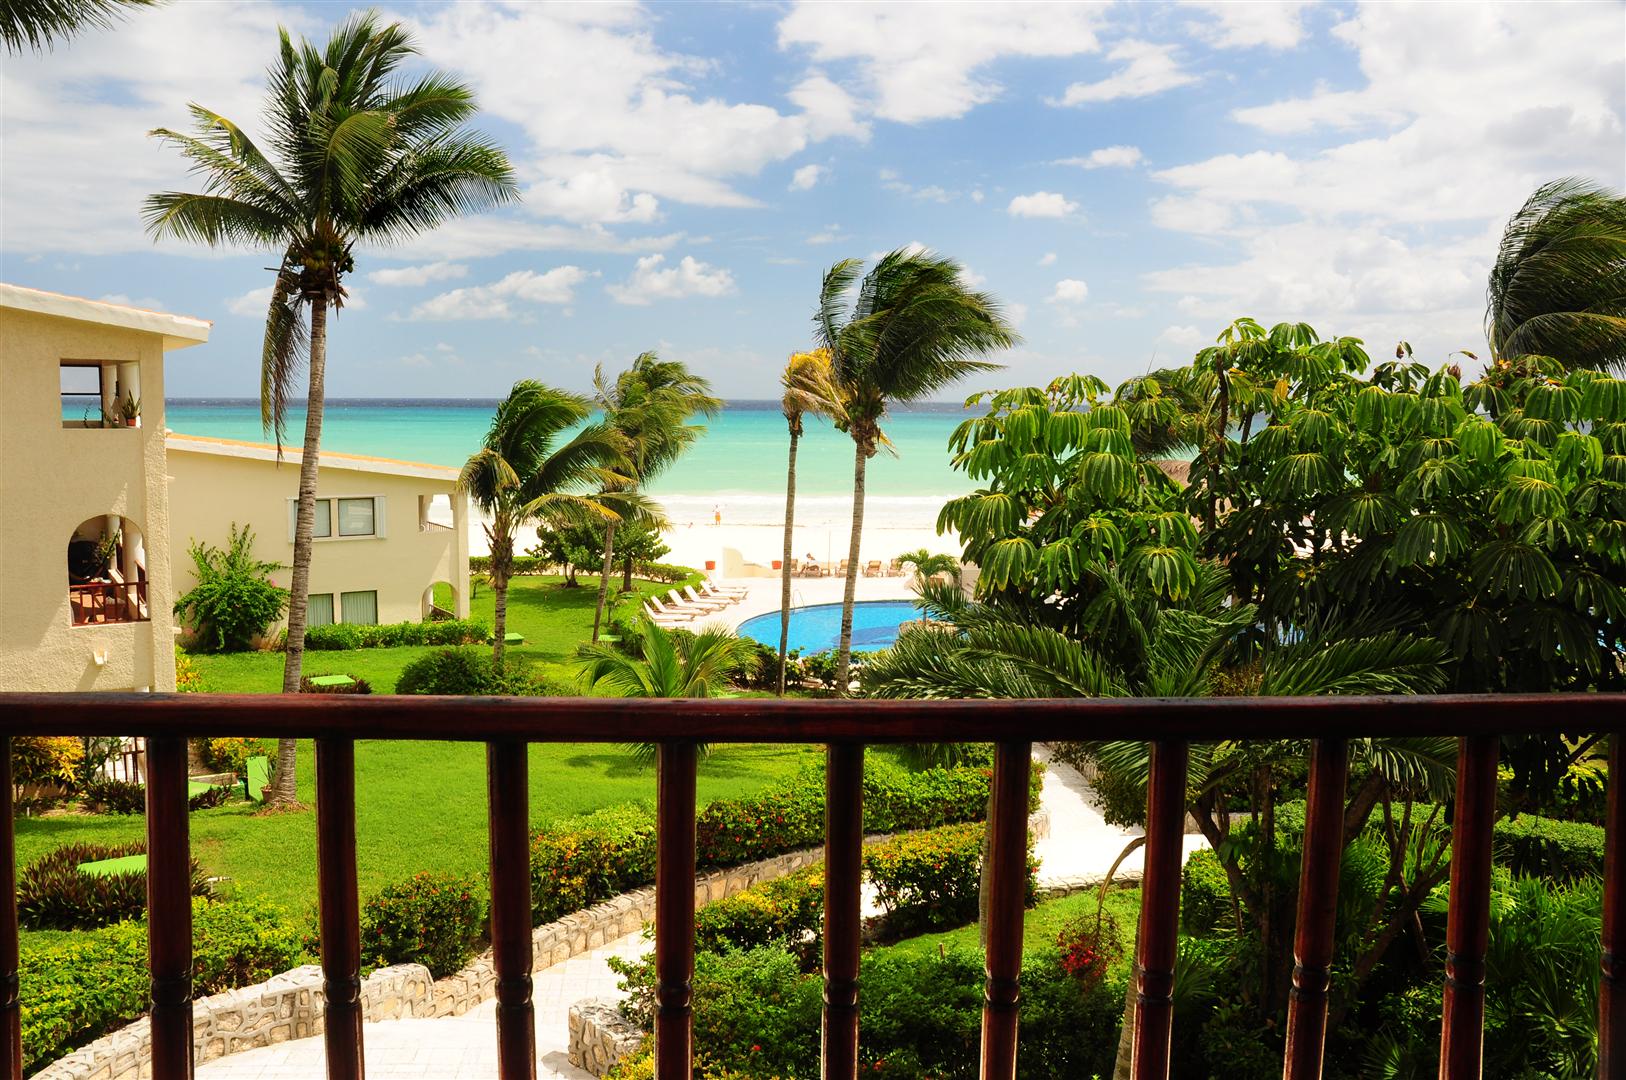 Our Most Popular 1 Bedr Oceanfront Condo at Xaman Ha! Come See Why!  - XH7116